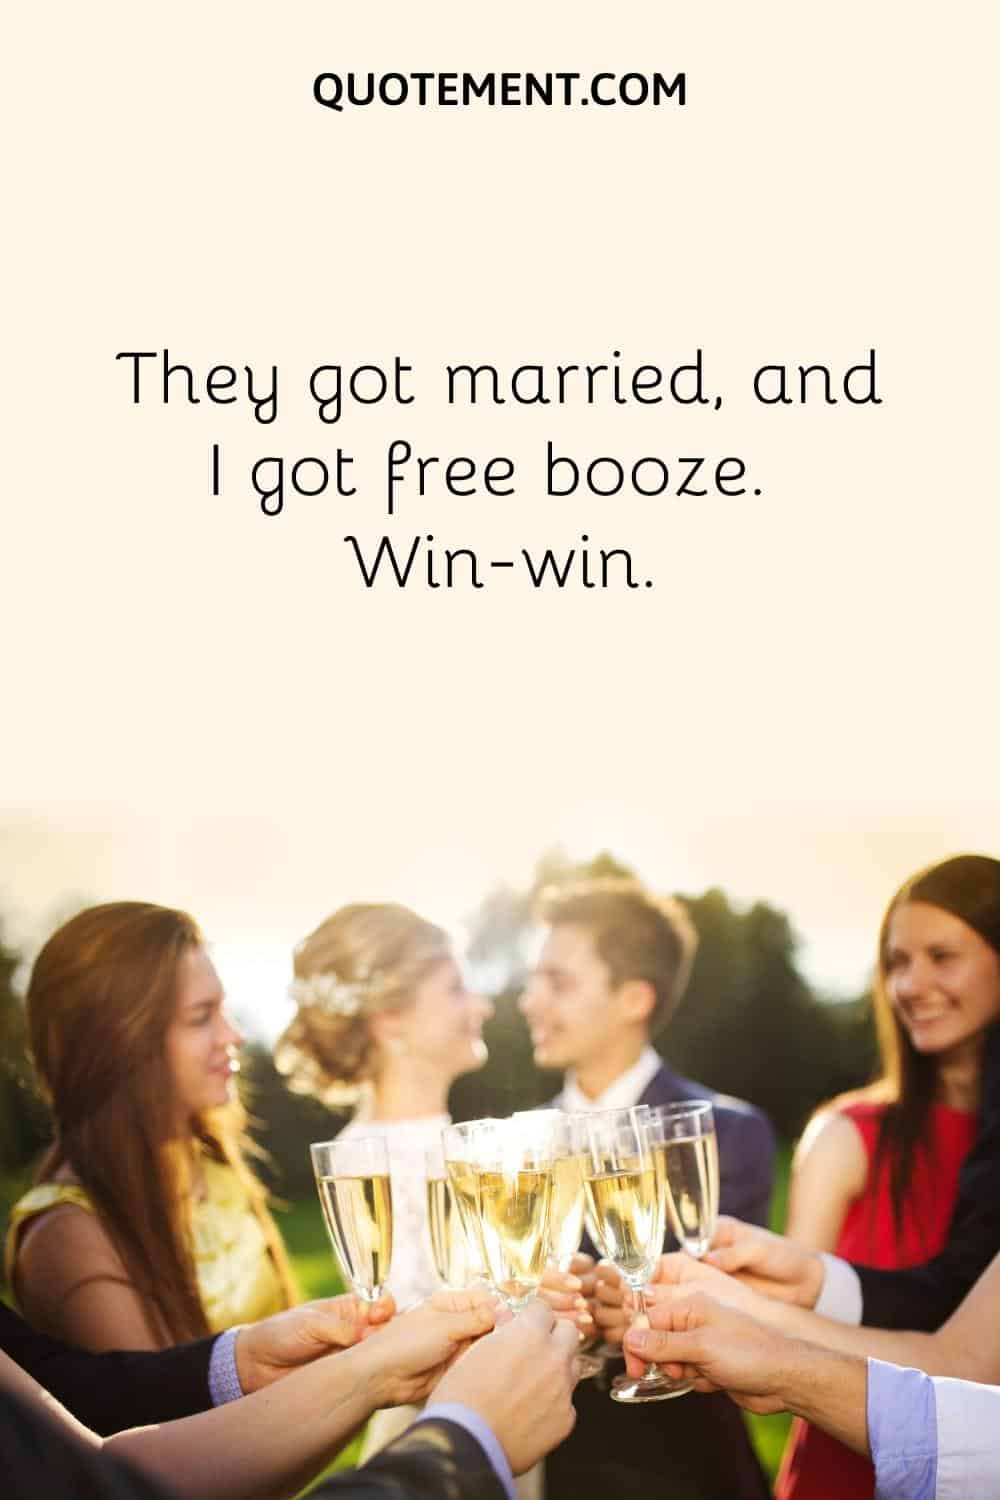 They got married, and I got free booze. Win-win.